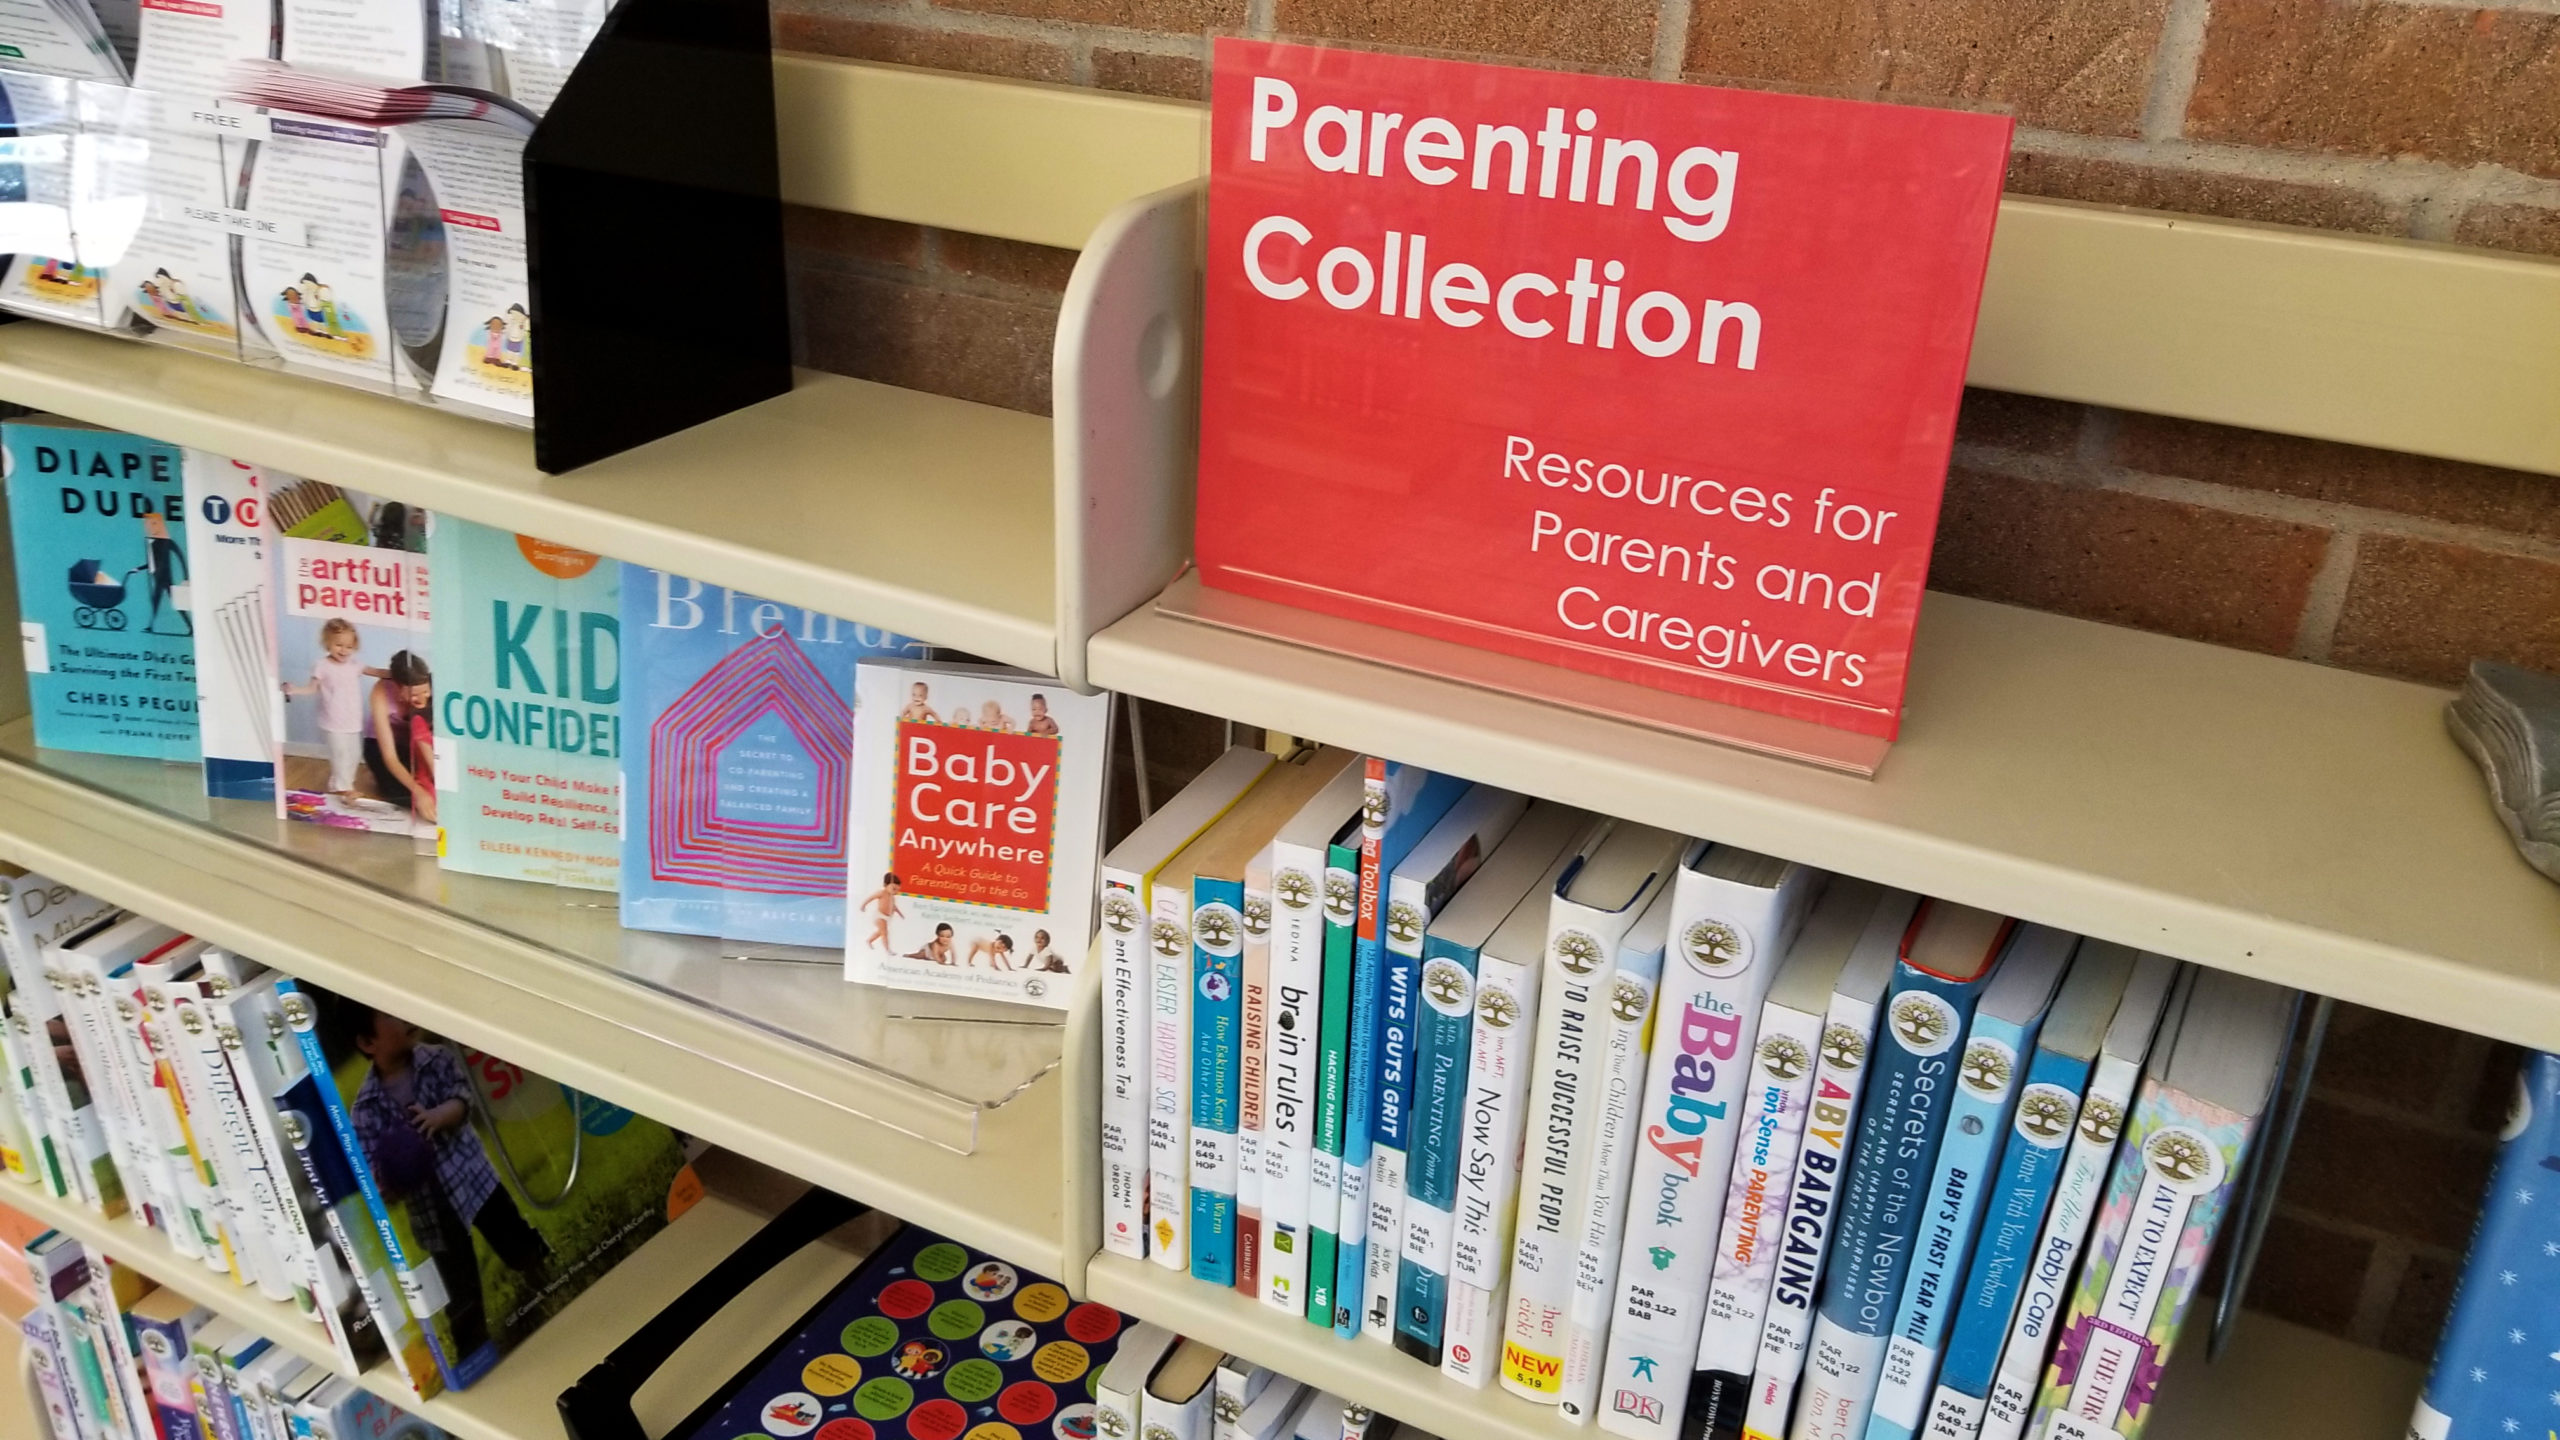 Collections Overview: Parenting Collection